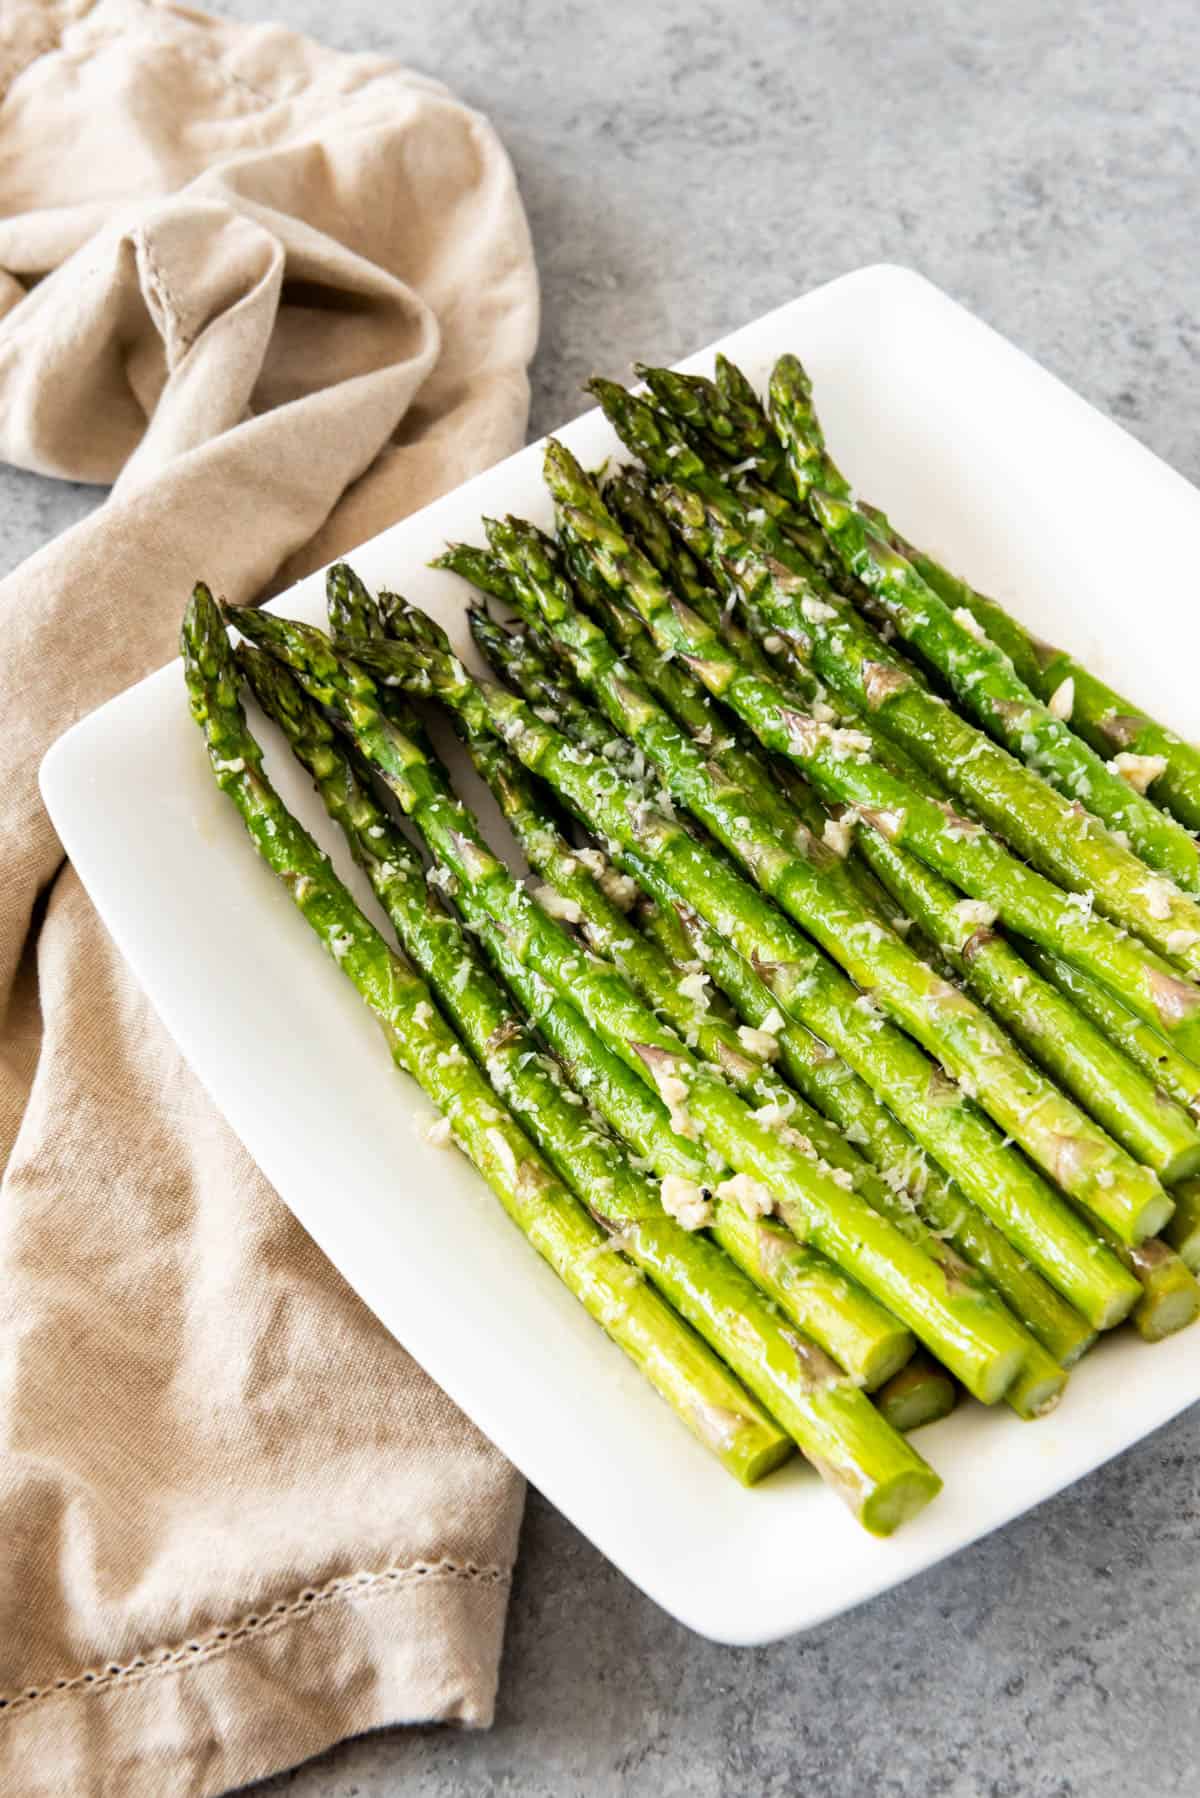 A white plate with a pile of neatly stacked asparagus over a tan tea towel.